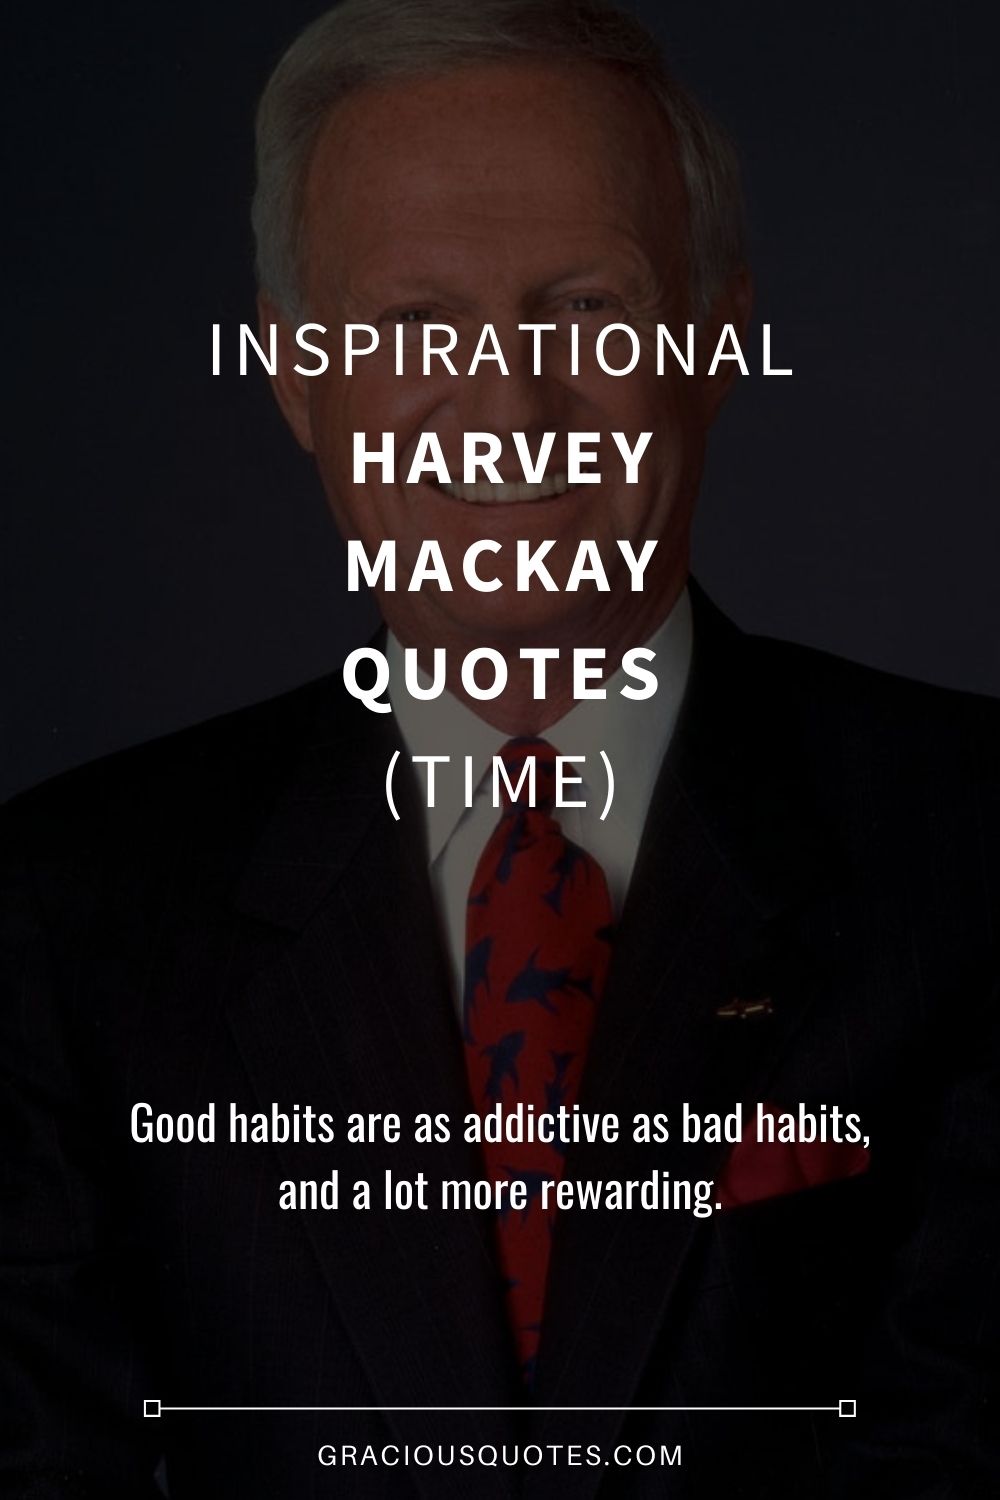 Inspirational Harvey Mackay Quotes (TIME) - Gracious Quotes